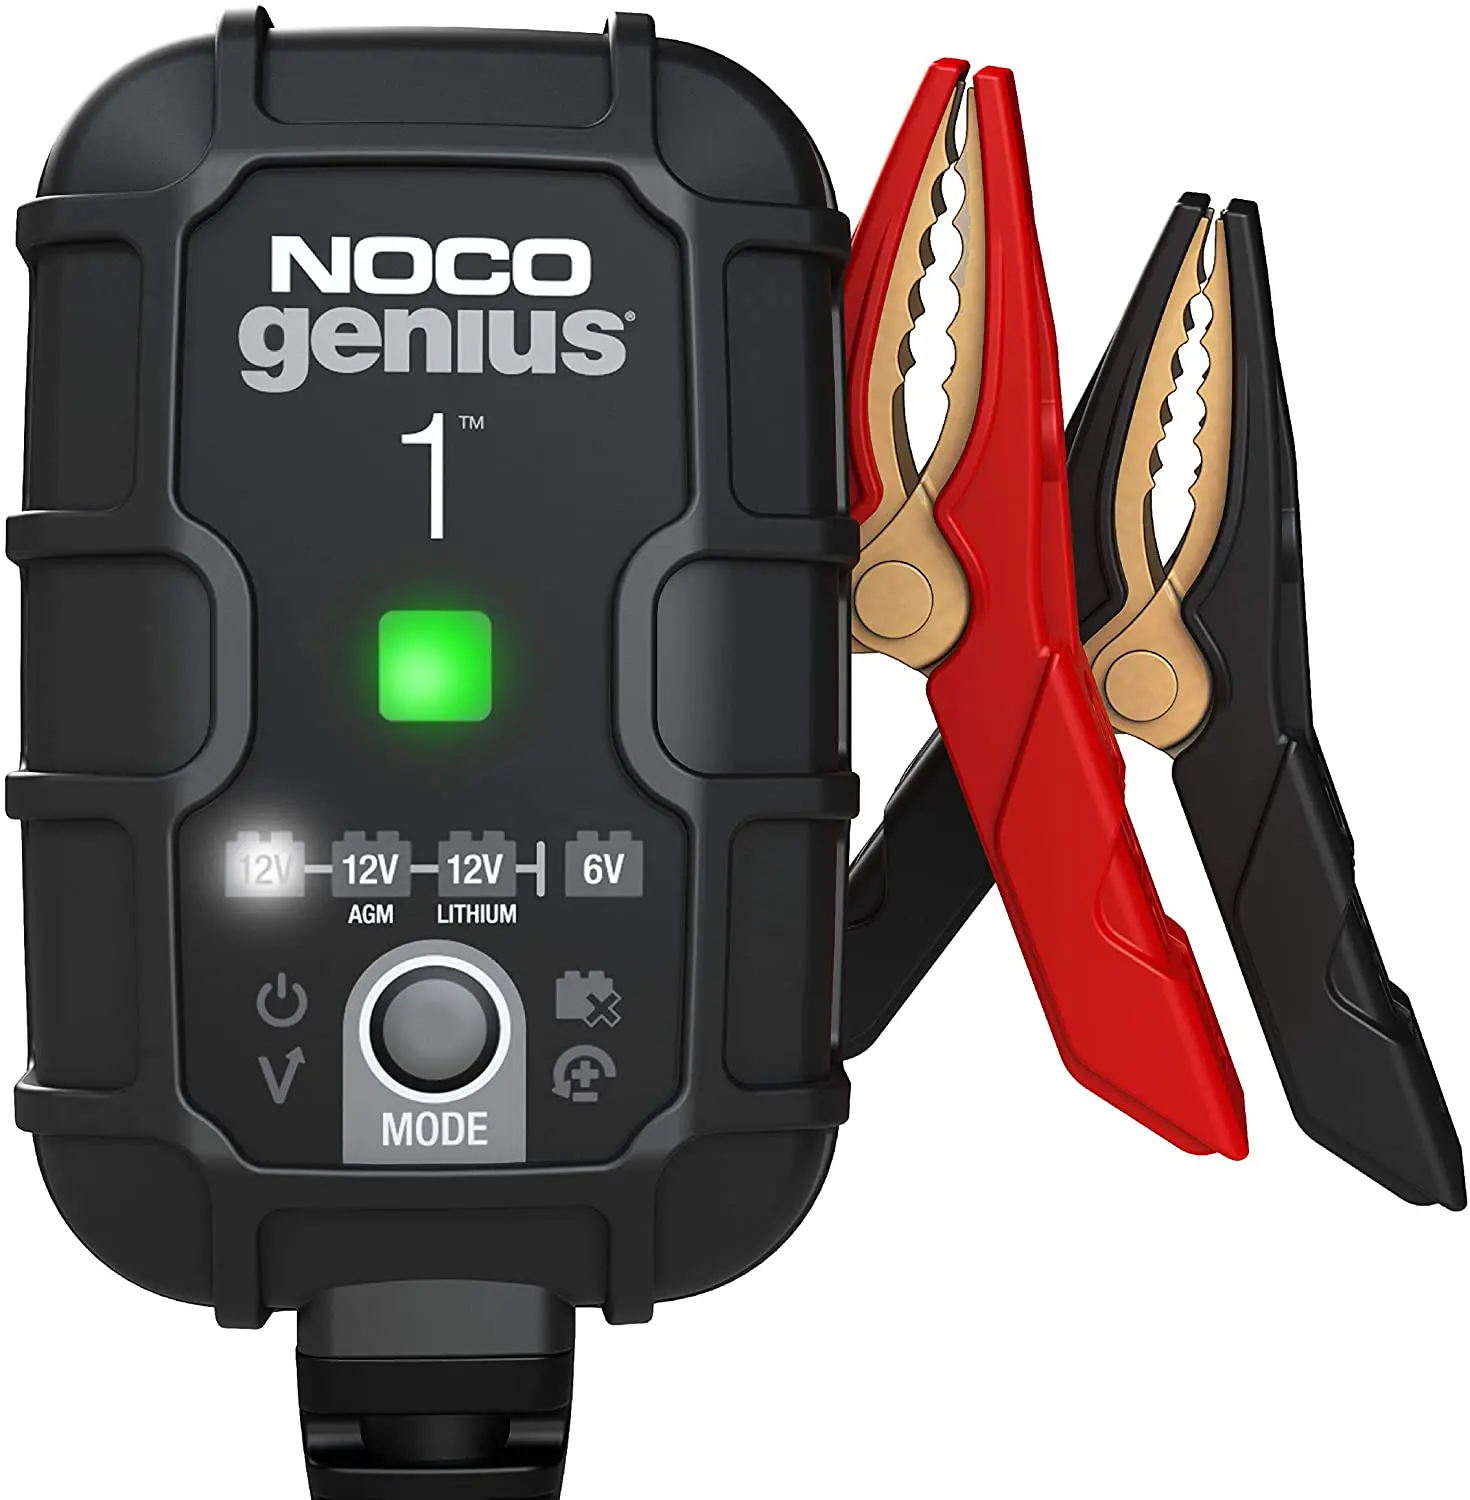 NOCO Battery Charger 10 Amp, 4 Bank